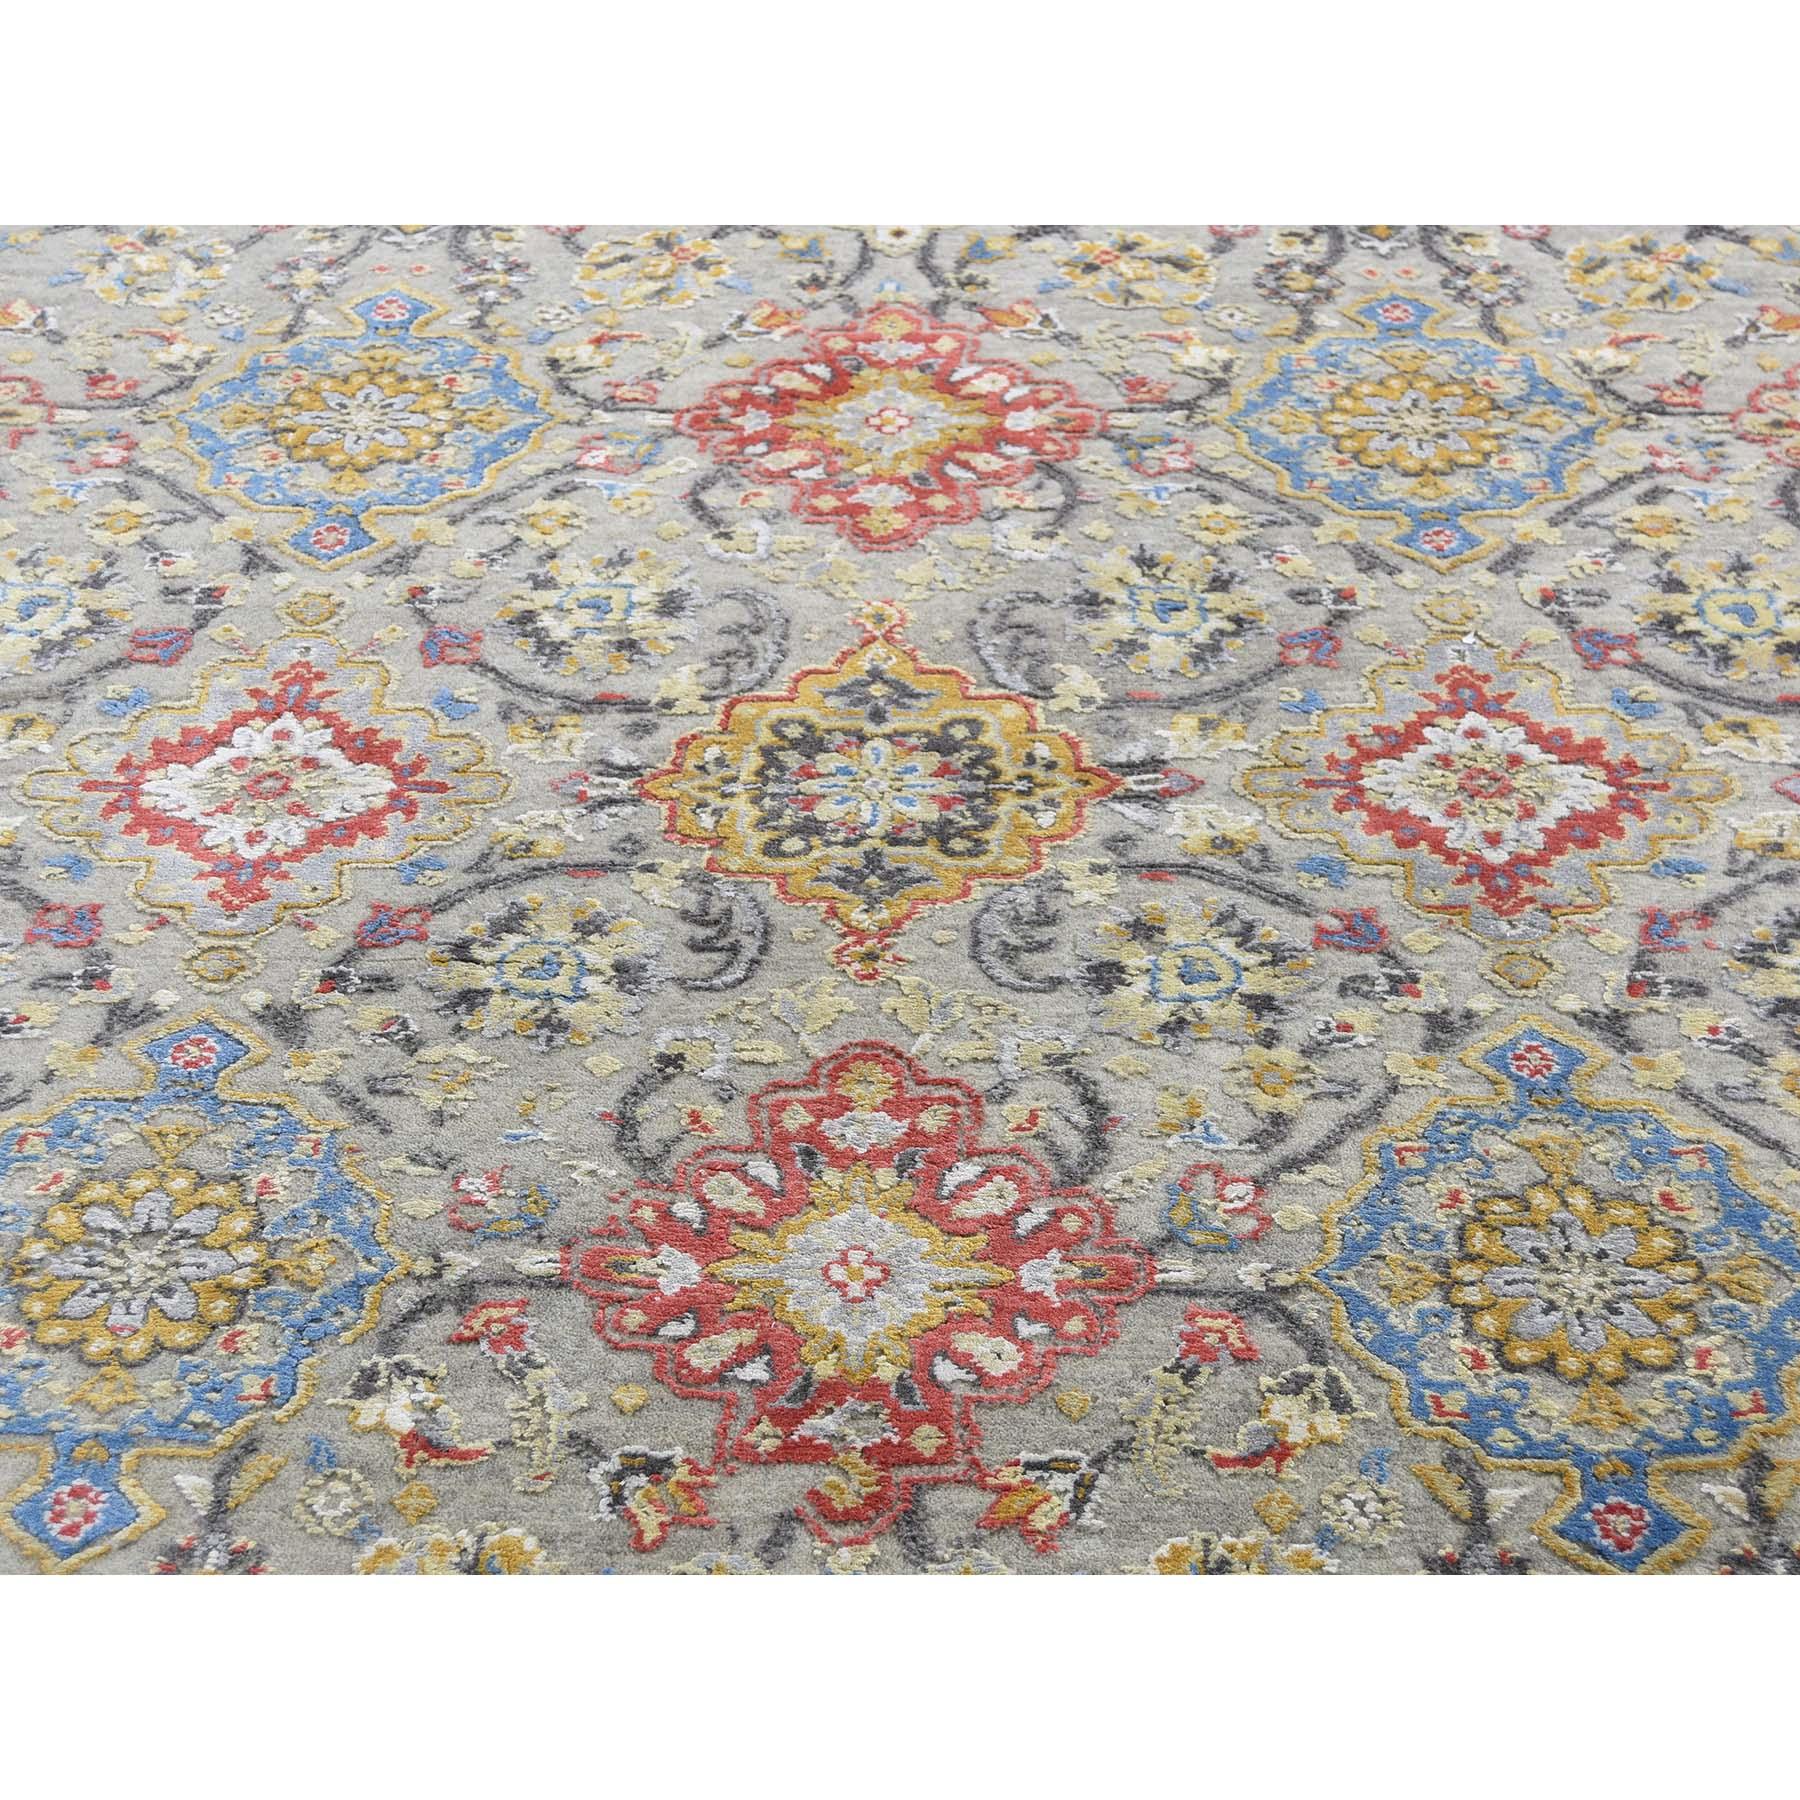 The Sunset Rosettes Pure Silk and Wool Hand Knotted Oriental Rug 2